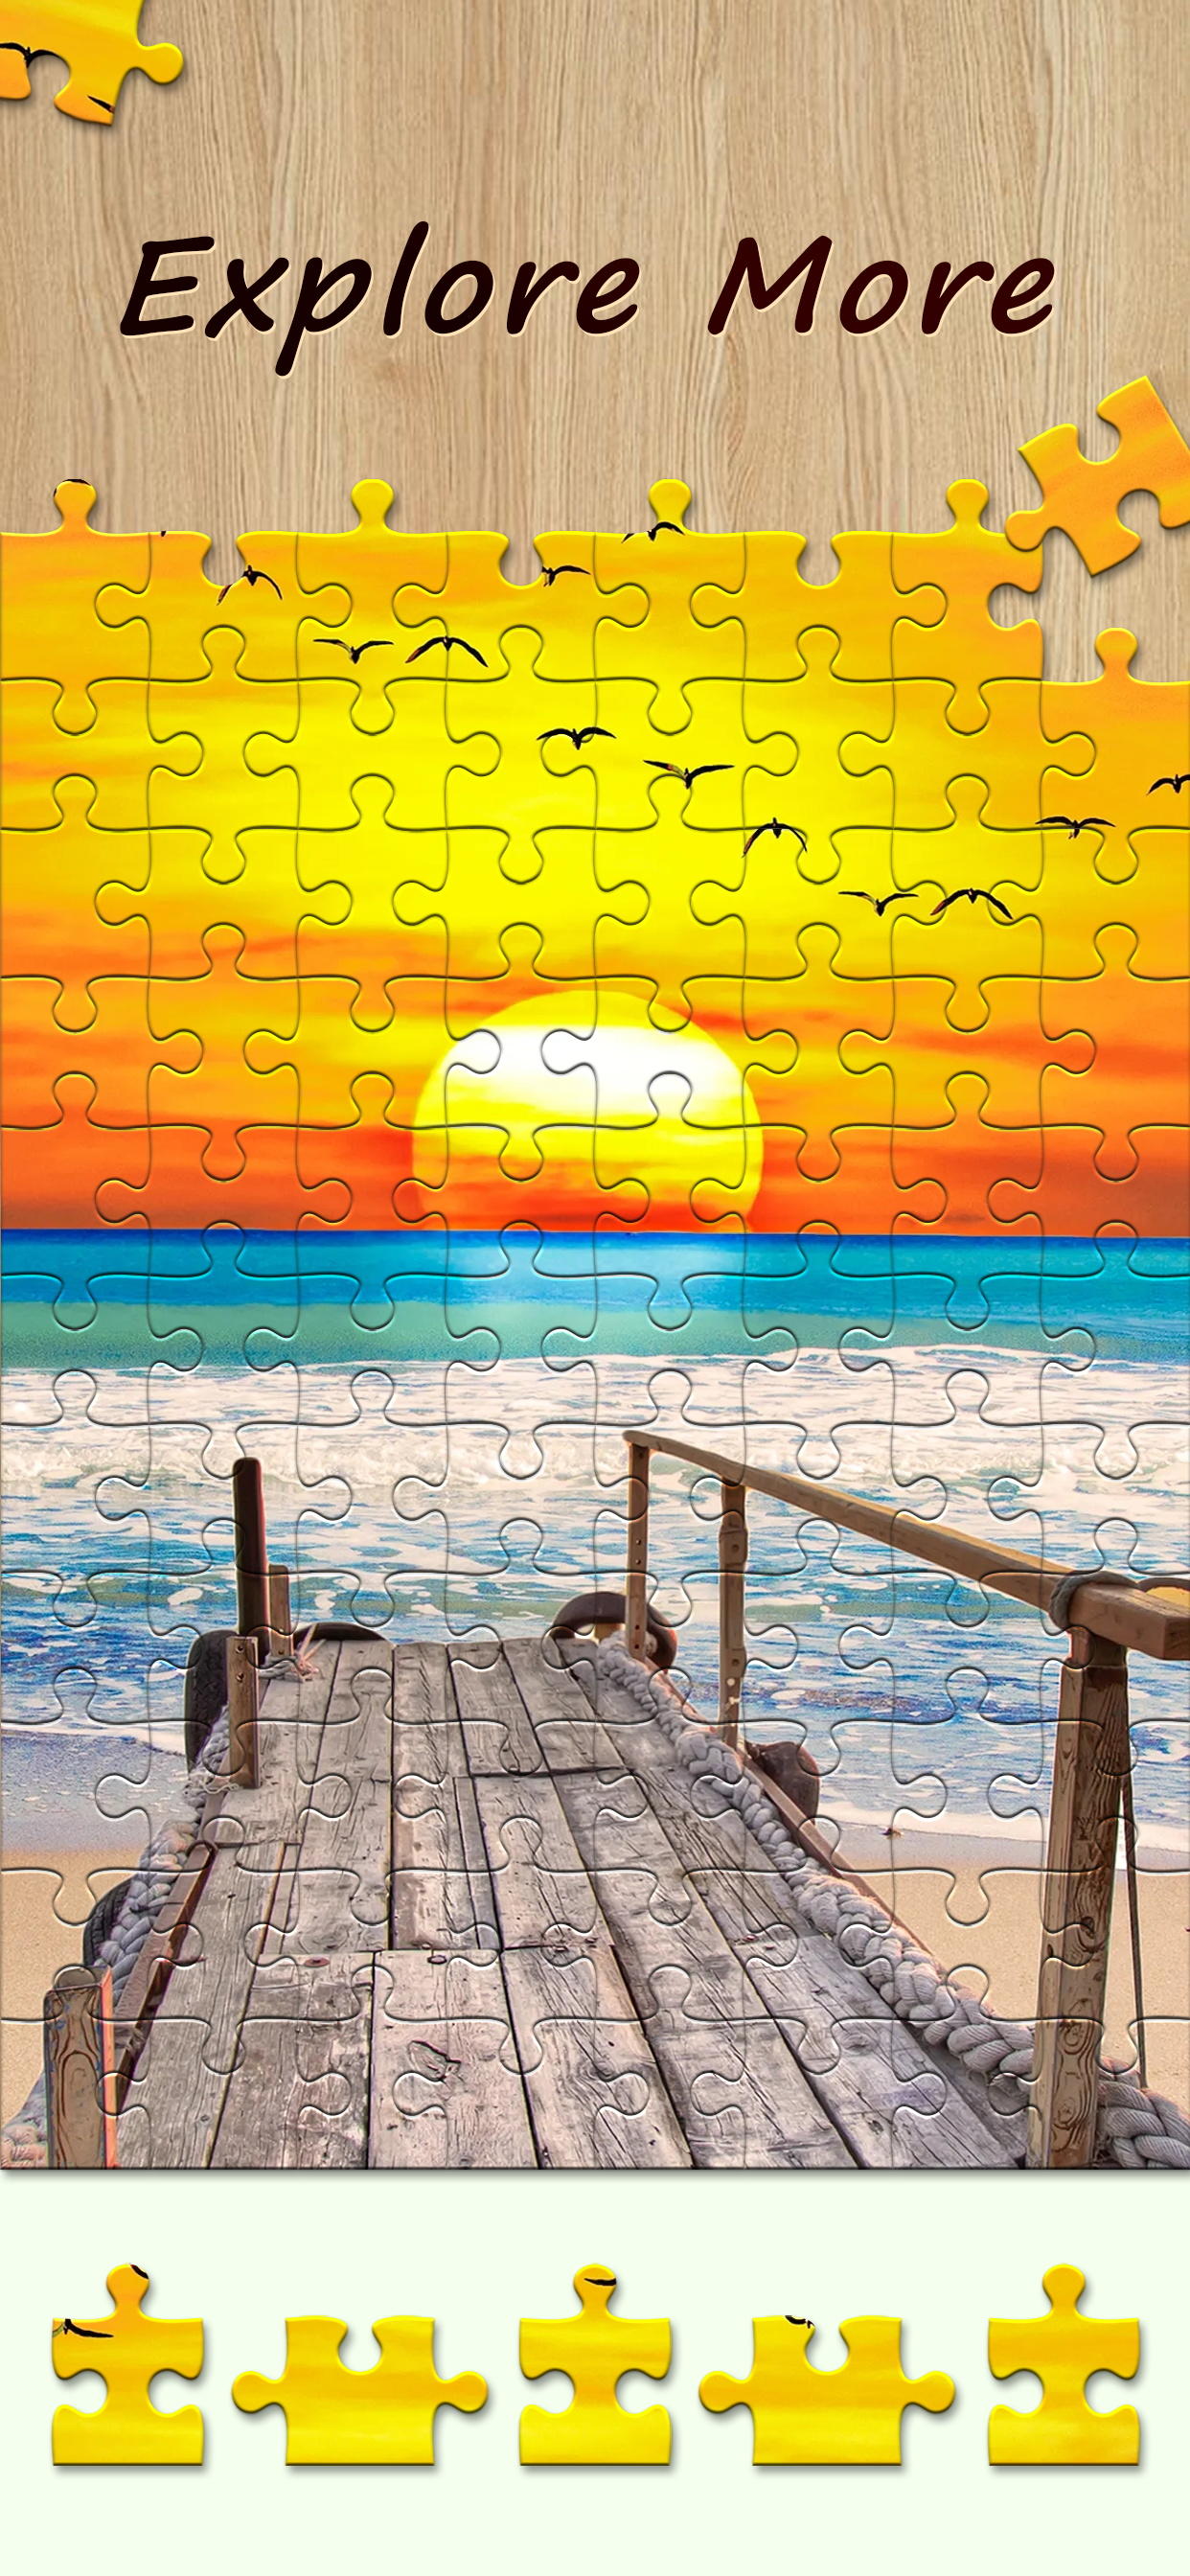 Daily Jigsaw - Puzzle Games 